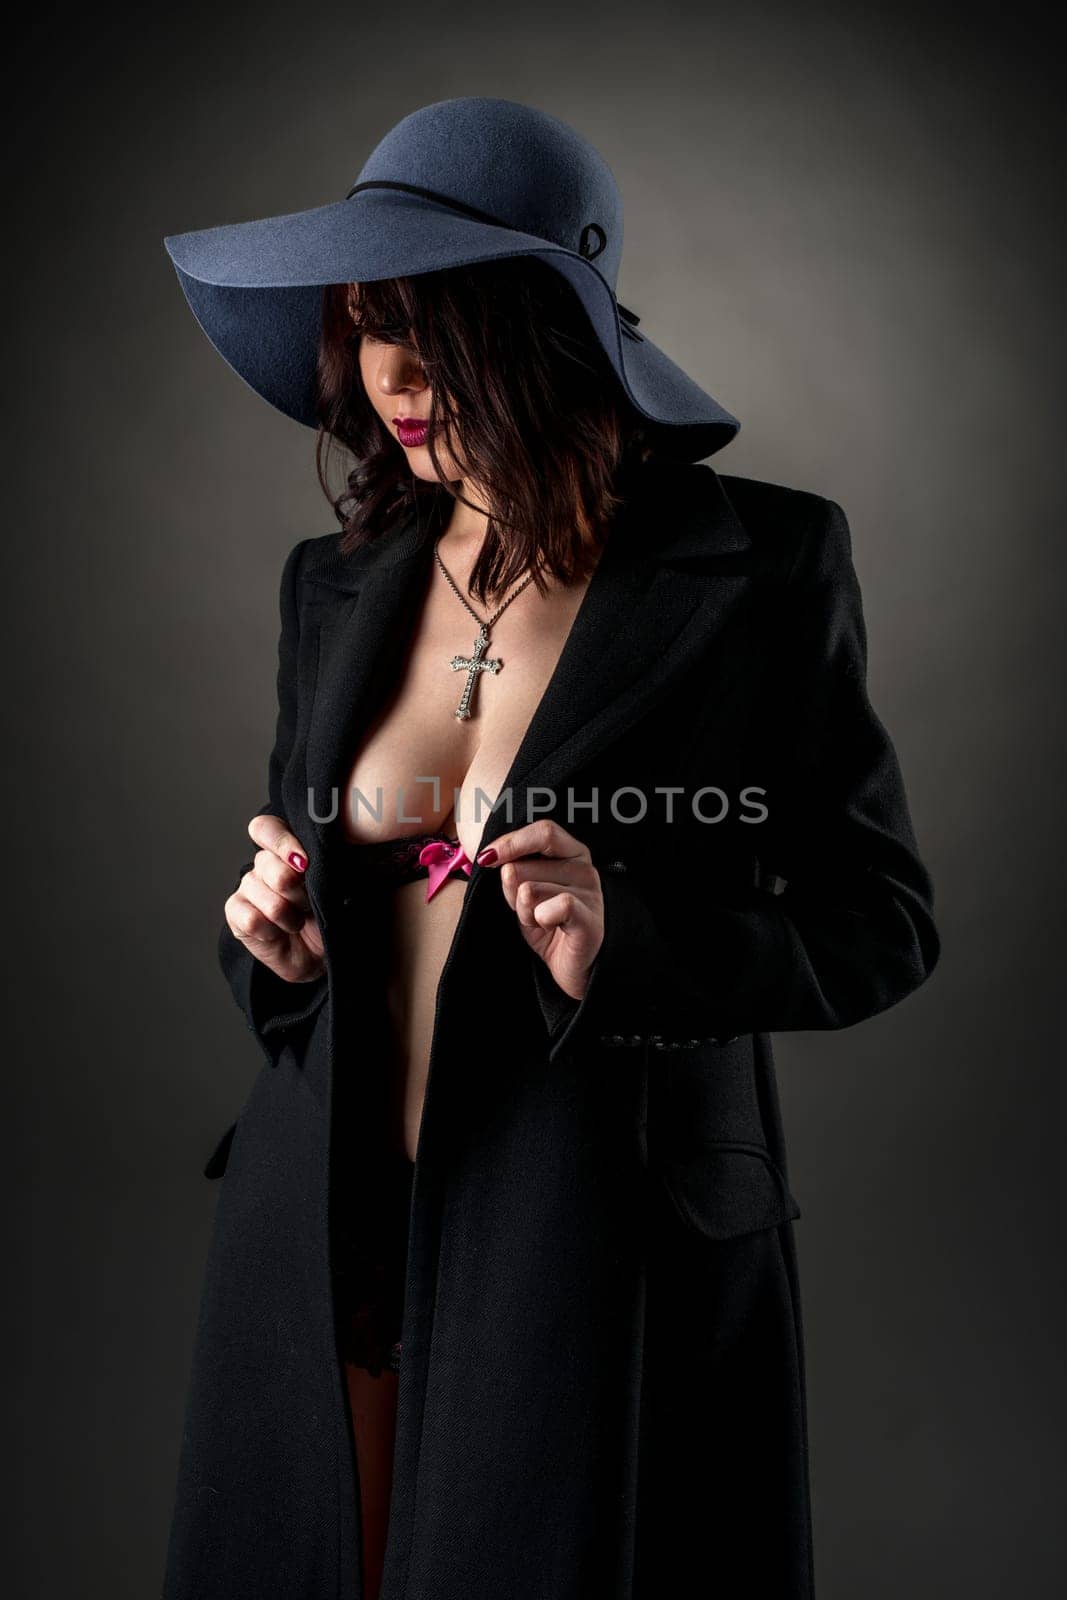 Studio photo of glamorous dressed woman bared her breasts